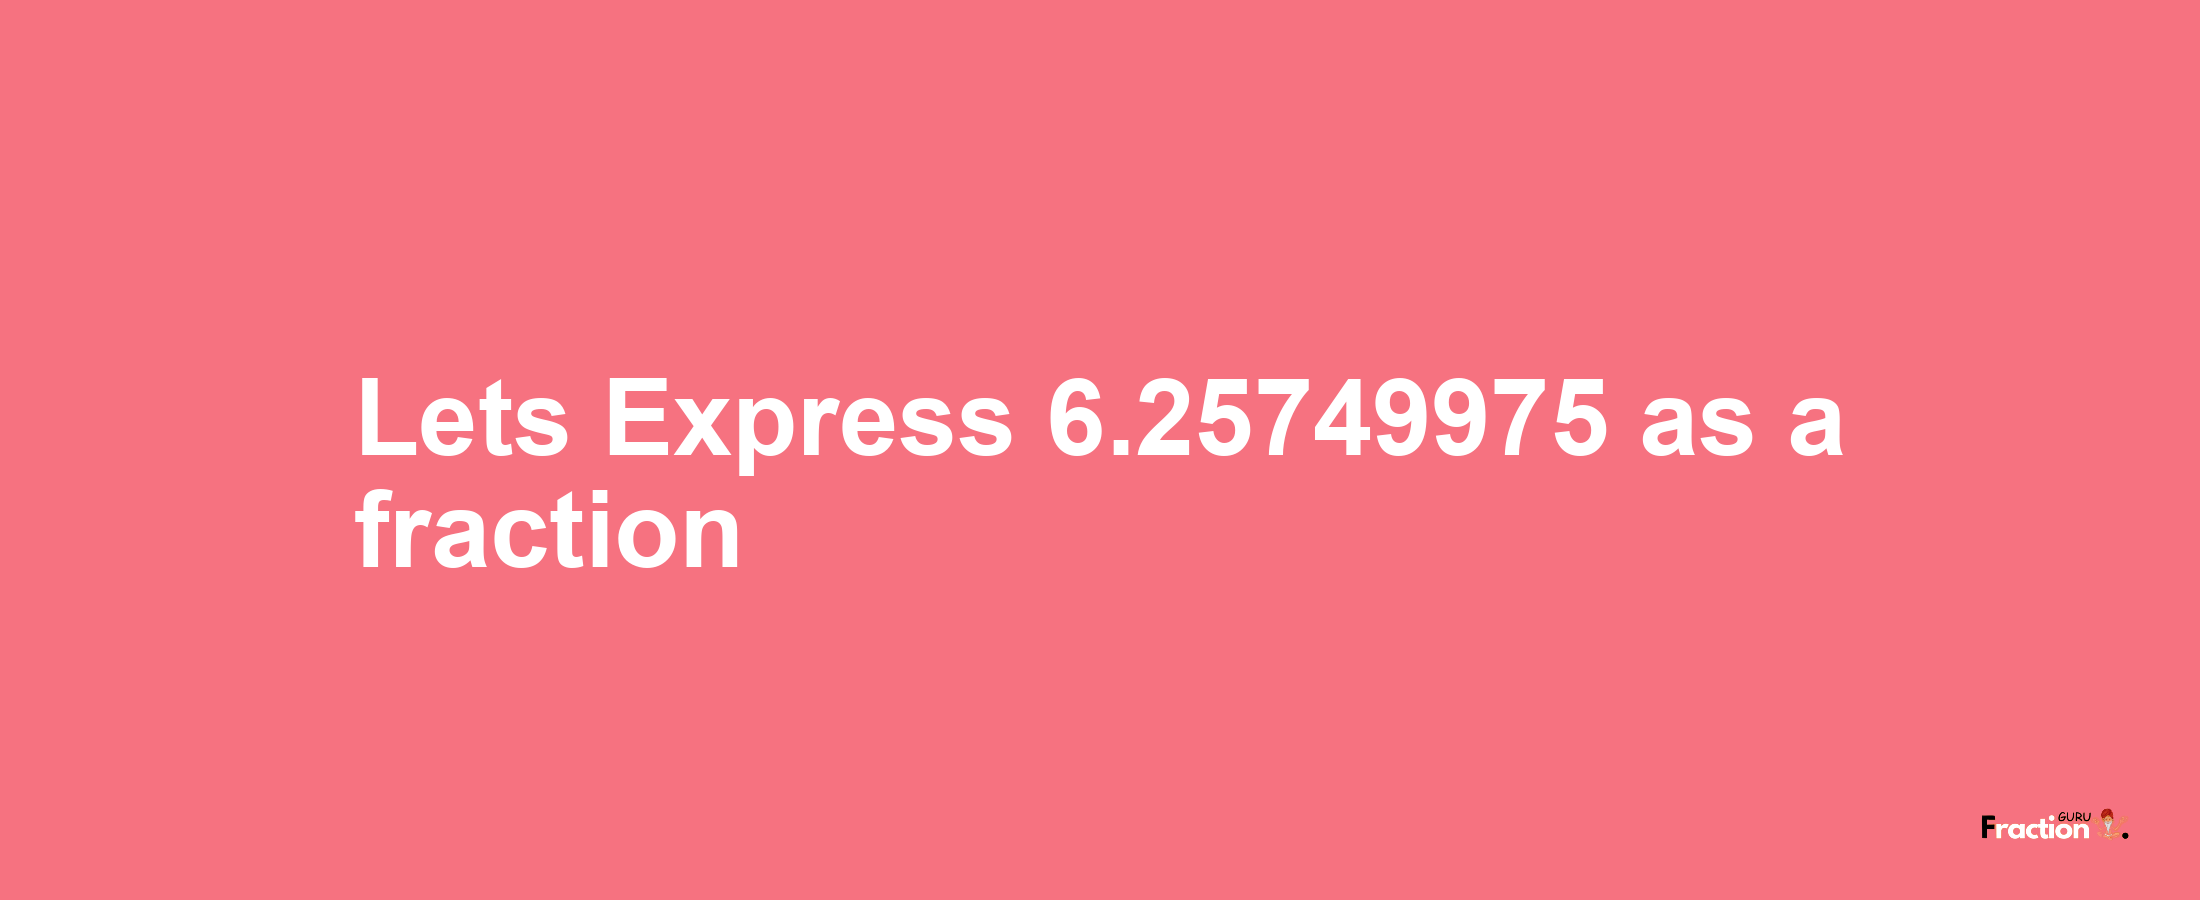 Lets Express 6.25749975 as afraction